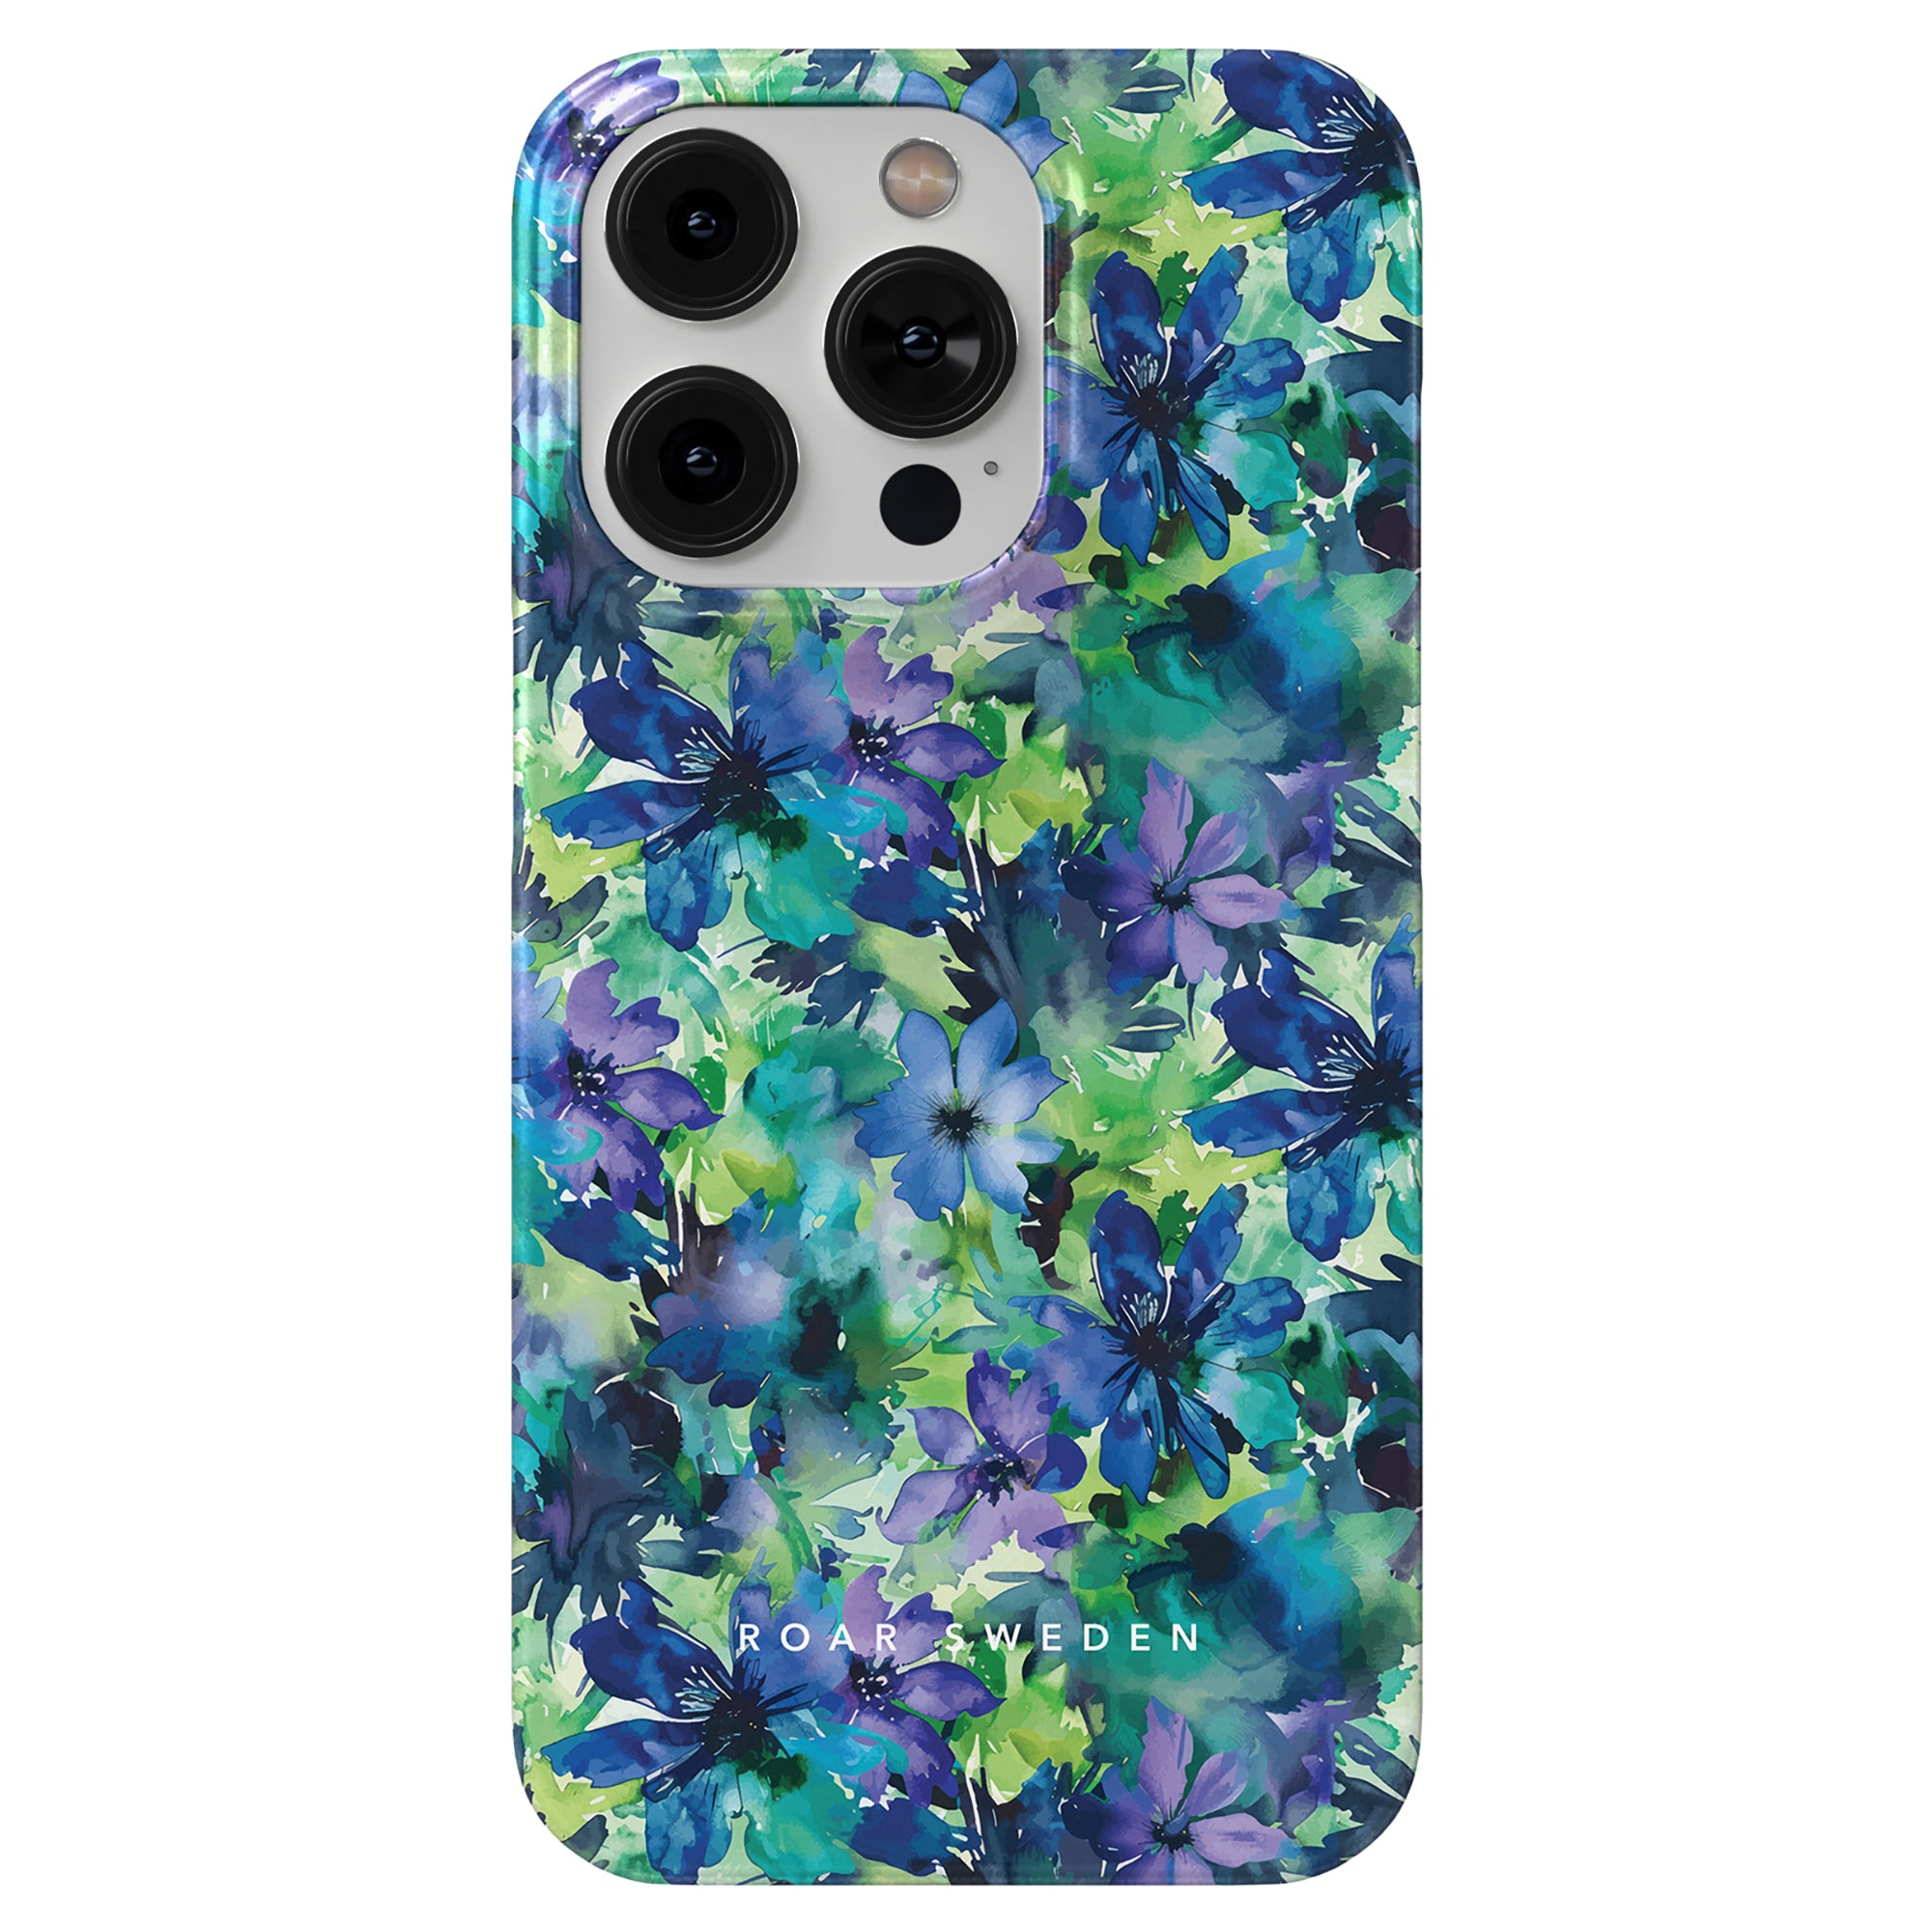 A smartphone with a blue, green, and purple blommönster case and three camera lenses on the back. The Sweet Flower - Slim Case has "ROAR SWEDEN" written at the bottom.